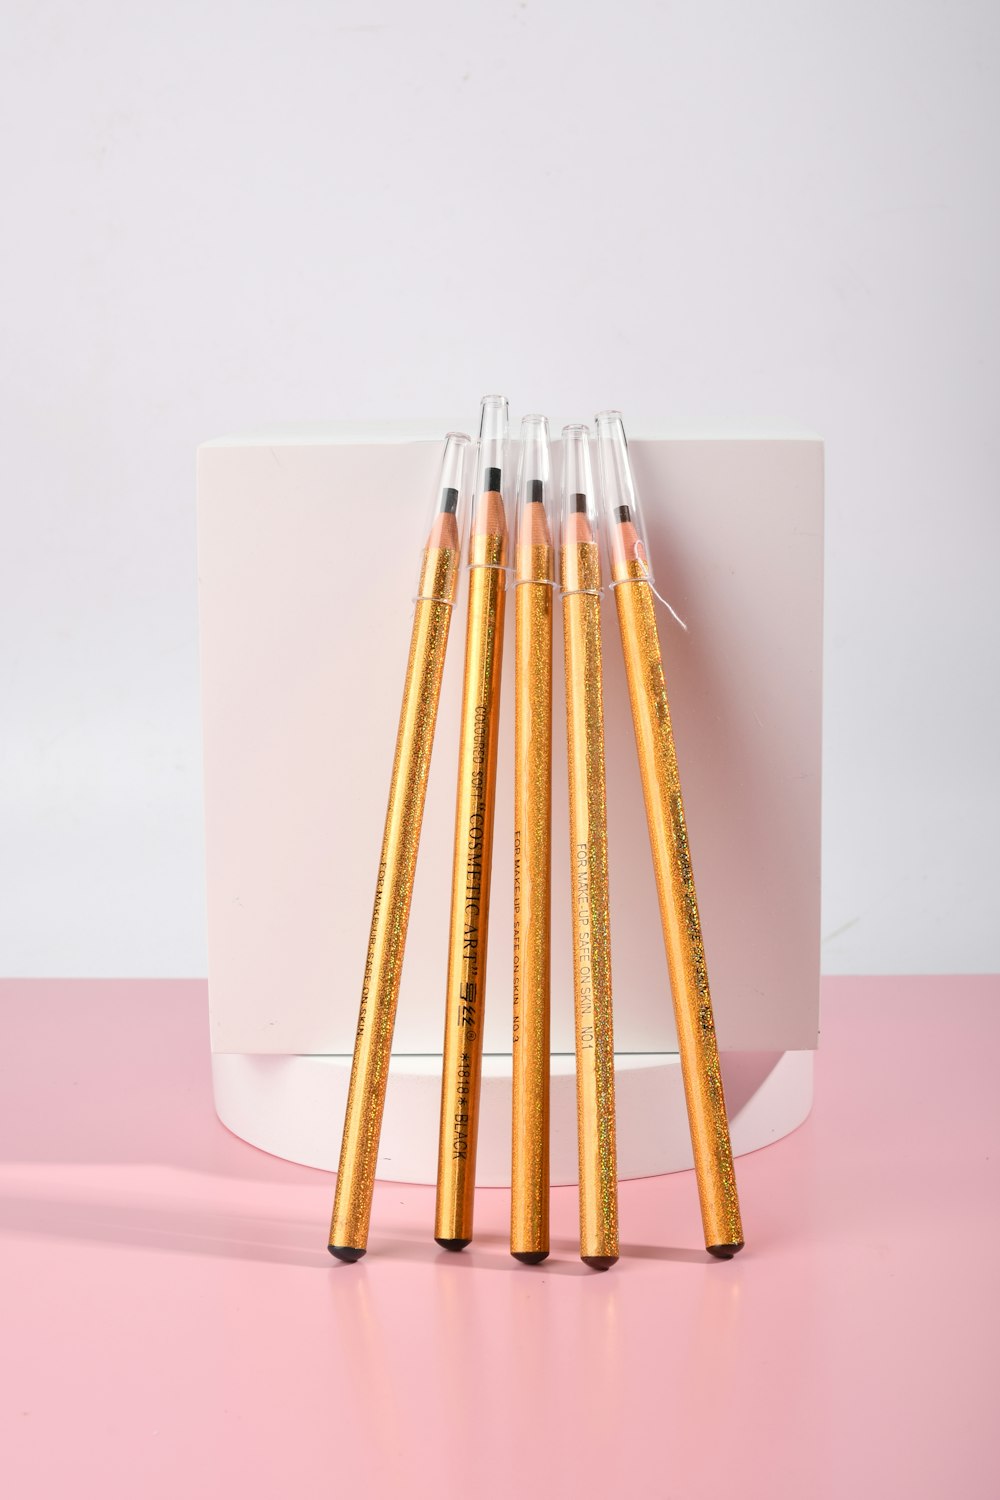 brown wooden sticks on white table